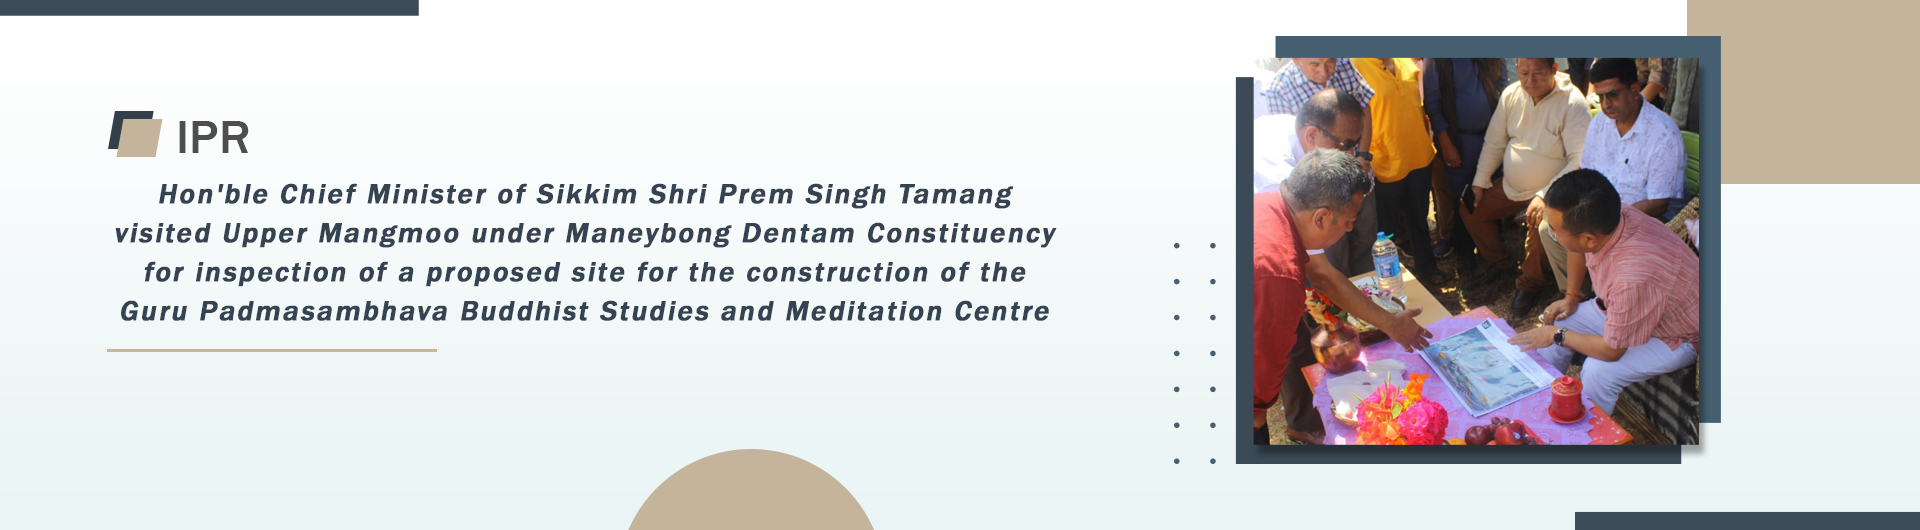 Hon'ble Chief Minister of Sikkim Shri Prem Singh Tamang visited Upper Mangmoo under Maneybong Dentam Constituency for inspection of a proposed site for the construction of the Guru Padmasambhava Buddhist Studies and Meditation Centre